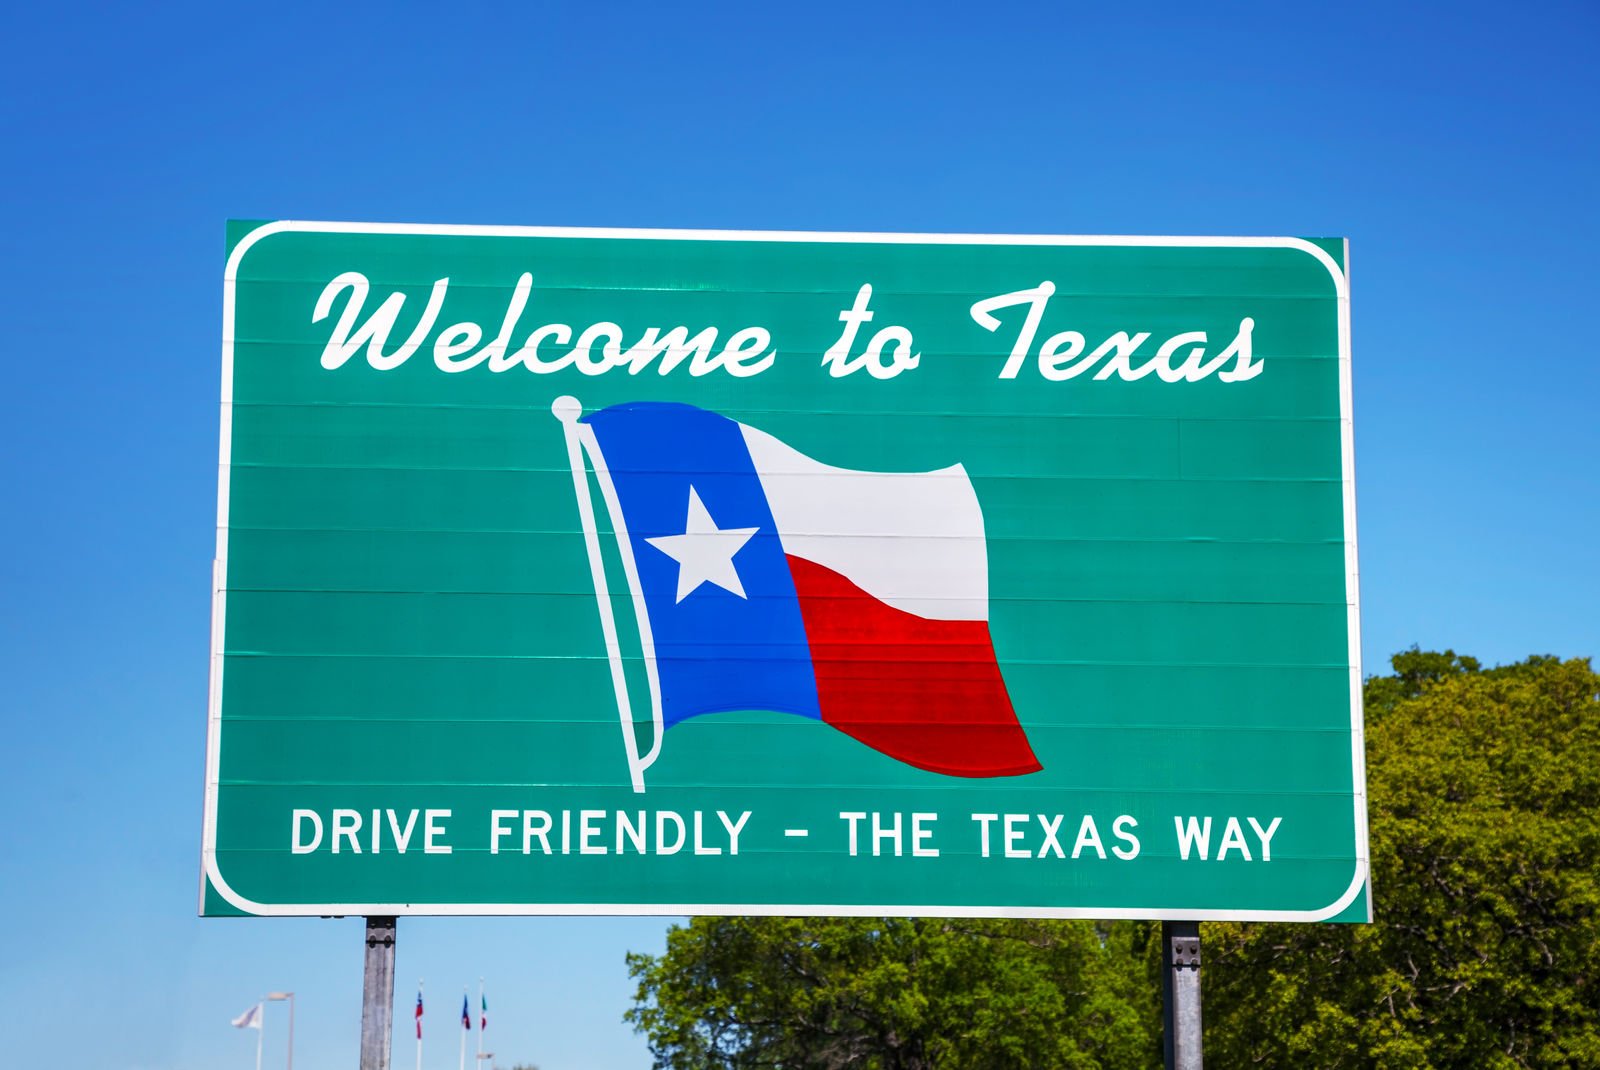 What are state minimums for car insurance in Texas?